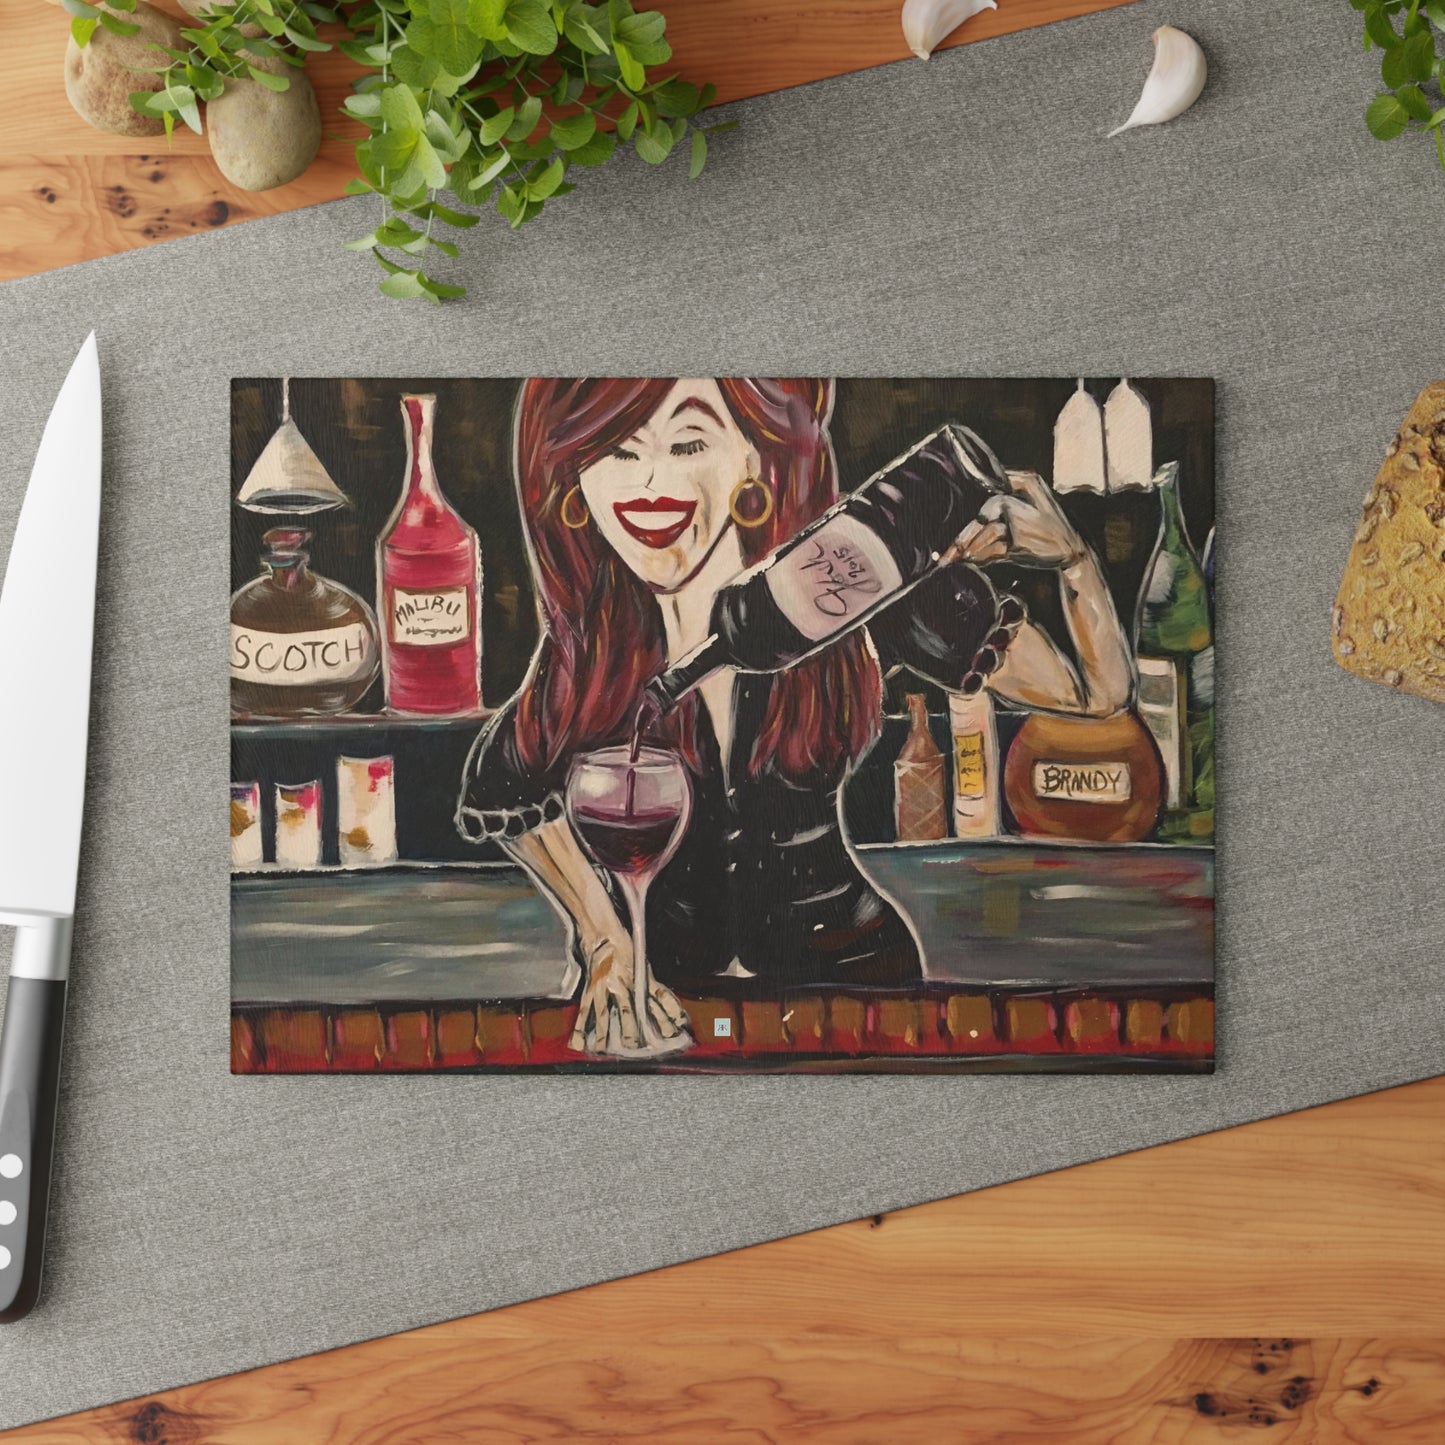 Sassy Notes Glass Cutting Board